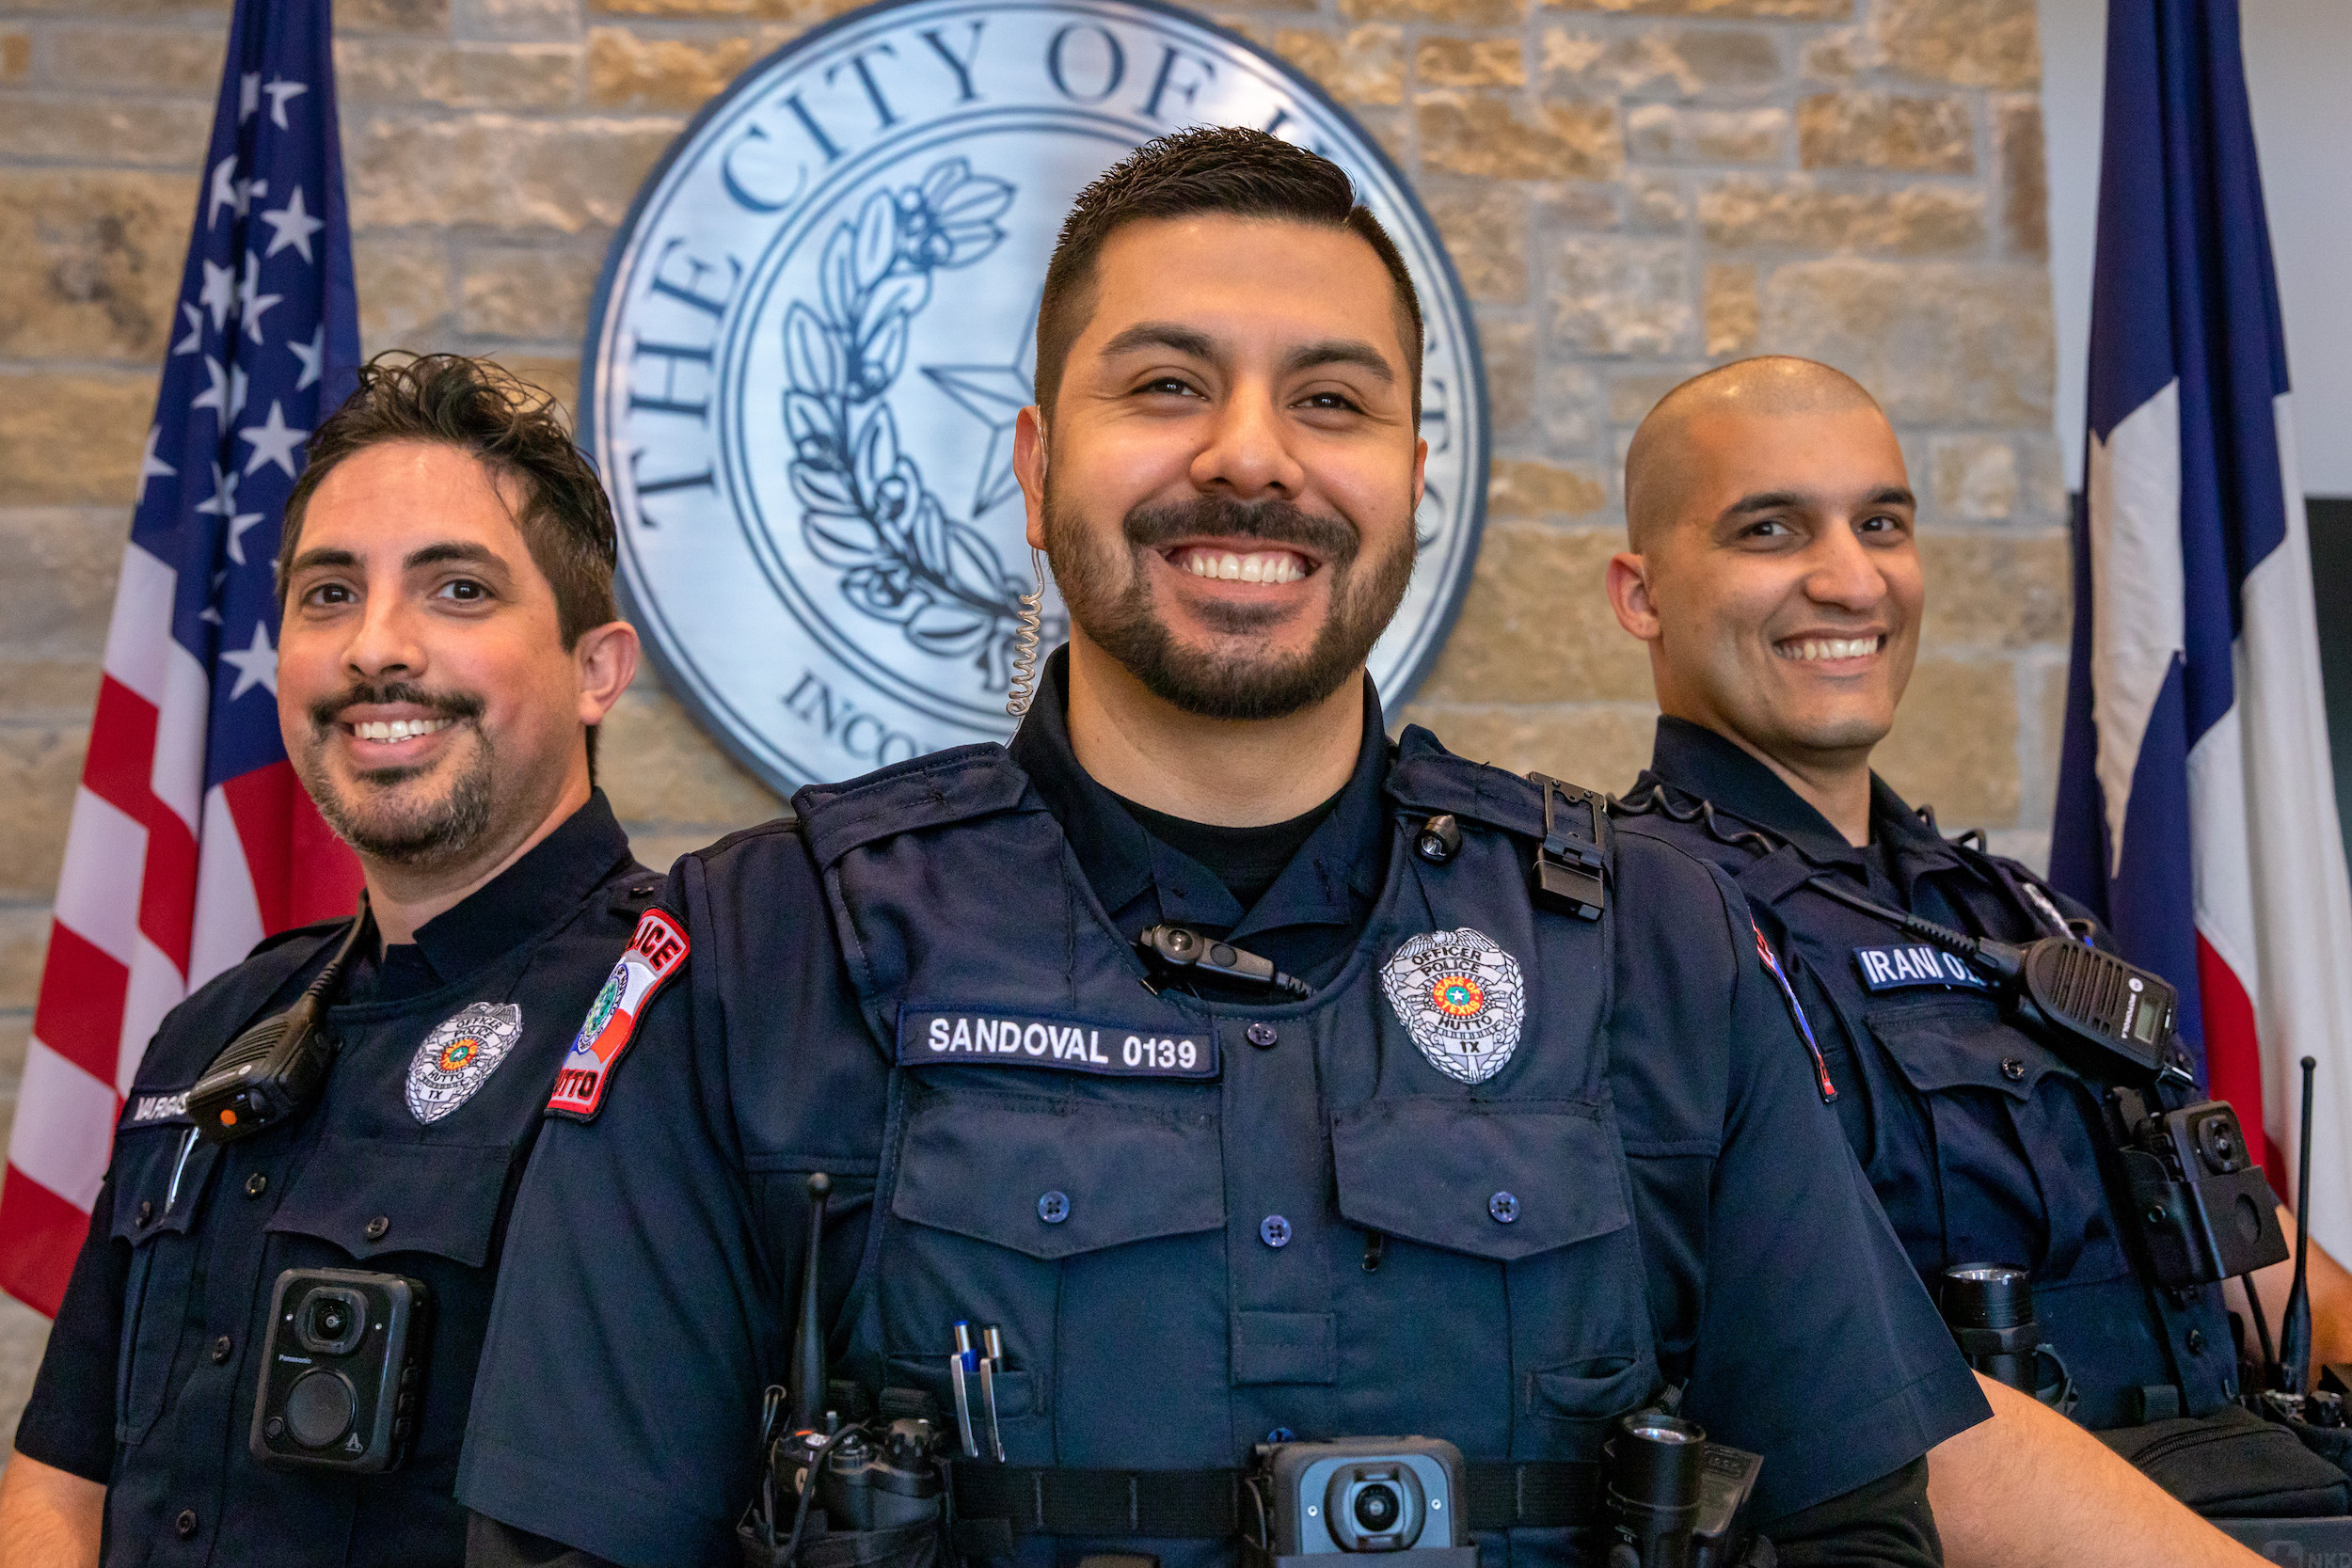 Photo of three police officers standing in front of The City of Hutto seal